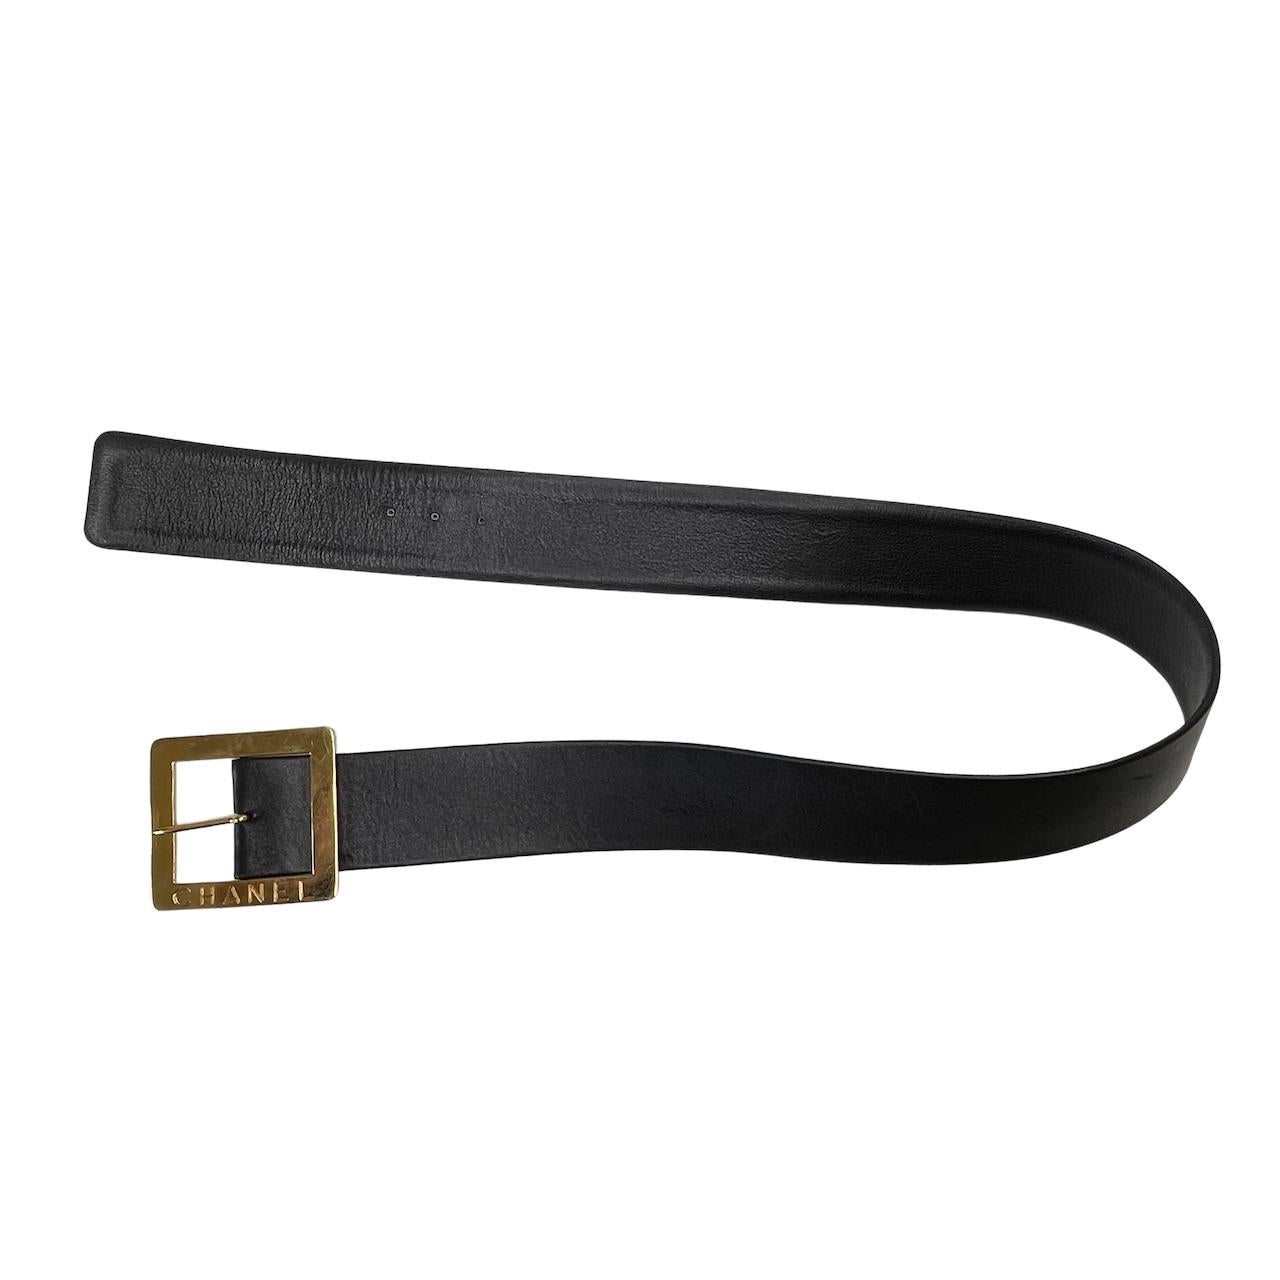 This vintage belt is from the the 1990 collection and features black leather, gold-tone hardware and buckle closure.

COLOR: Black
MATERIAL: Leather
MEASURES: L 35” x W 1.7”
SIZE: 75/30
CONDITION: Good - faint scratching to buckle and leather.

Made